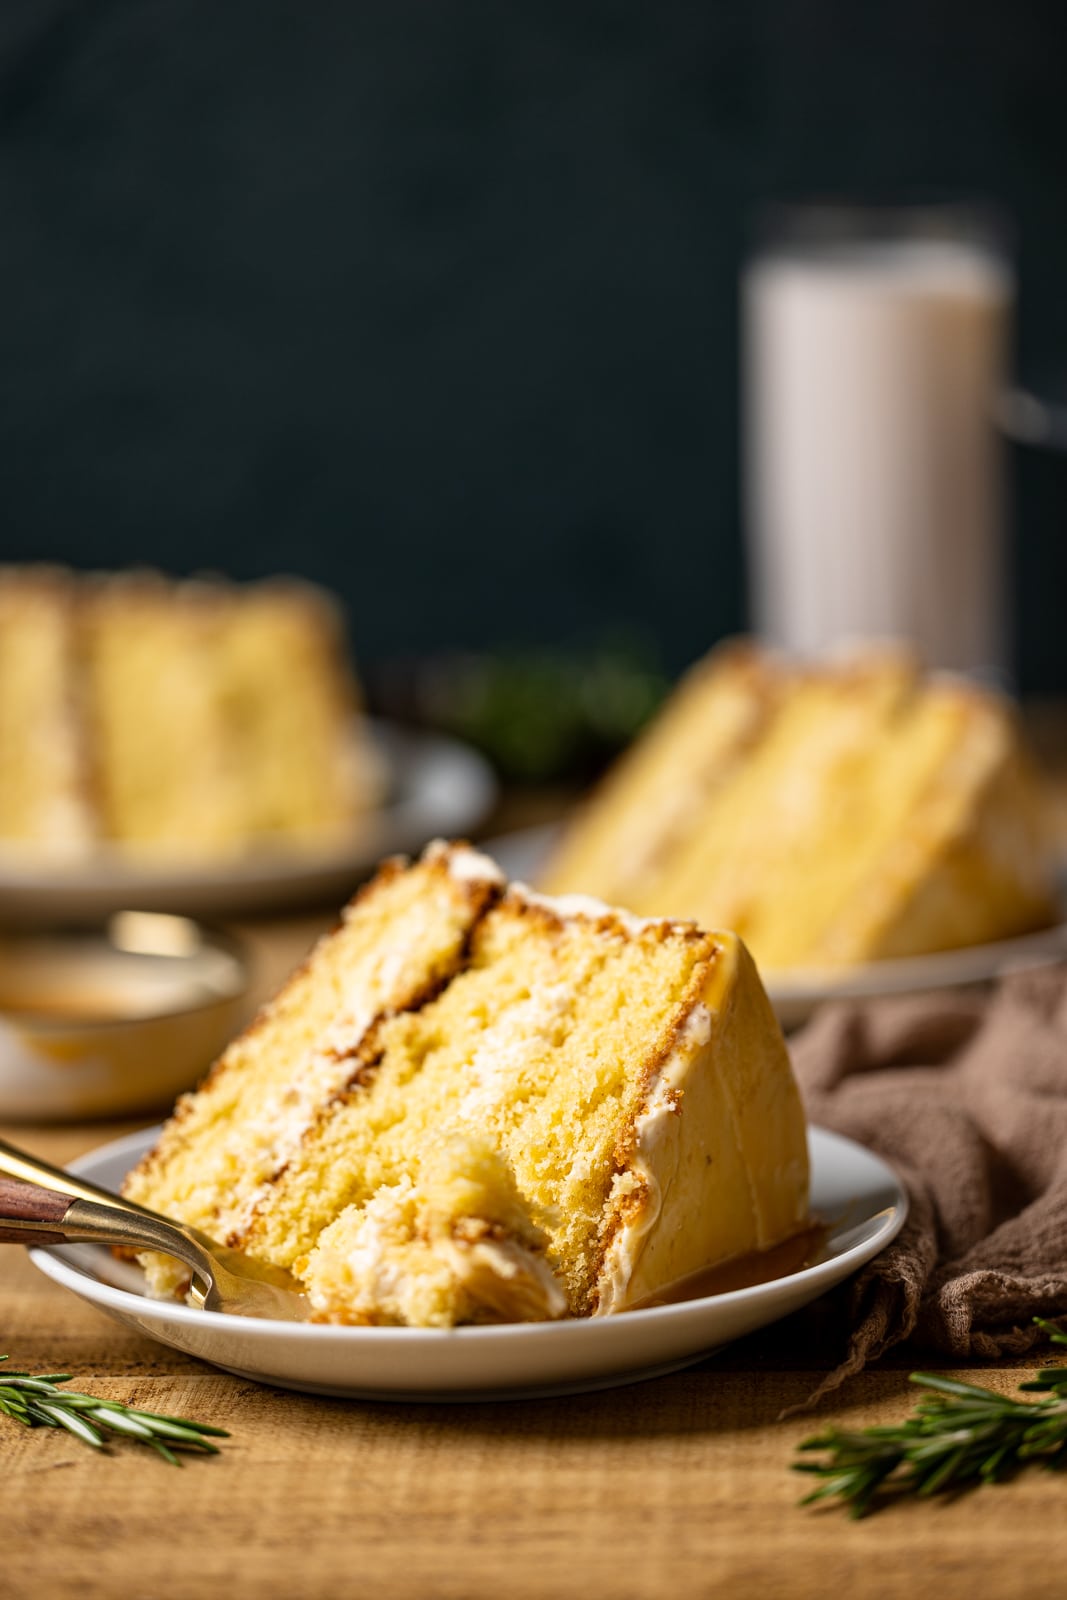 https://www.orchidsandsweettea.com/wp-content/uploads/2022/02/Southern-Salted-Caramel-Cake-9-of-9.jpg